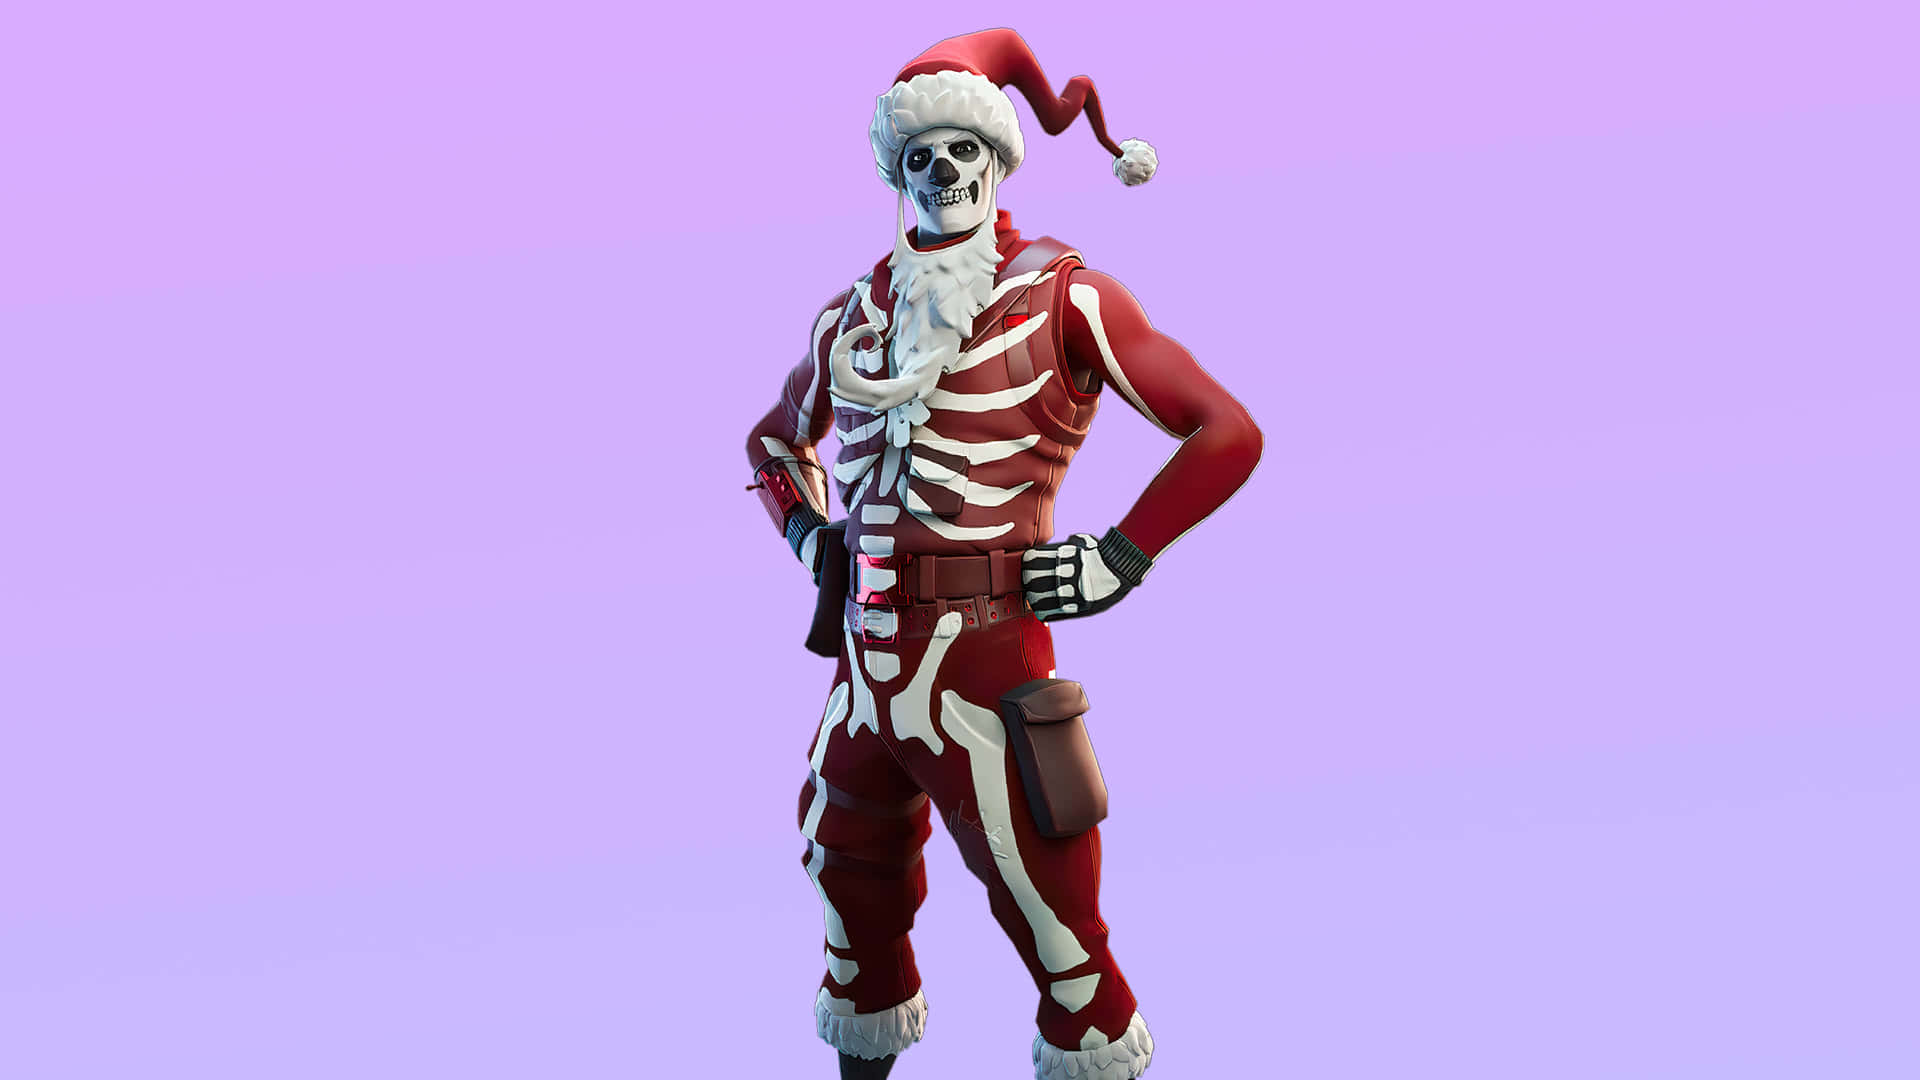 "Terrorize the competition with the Purple Skull Trooper!" Wallpaper